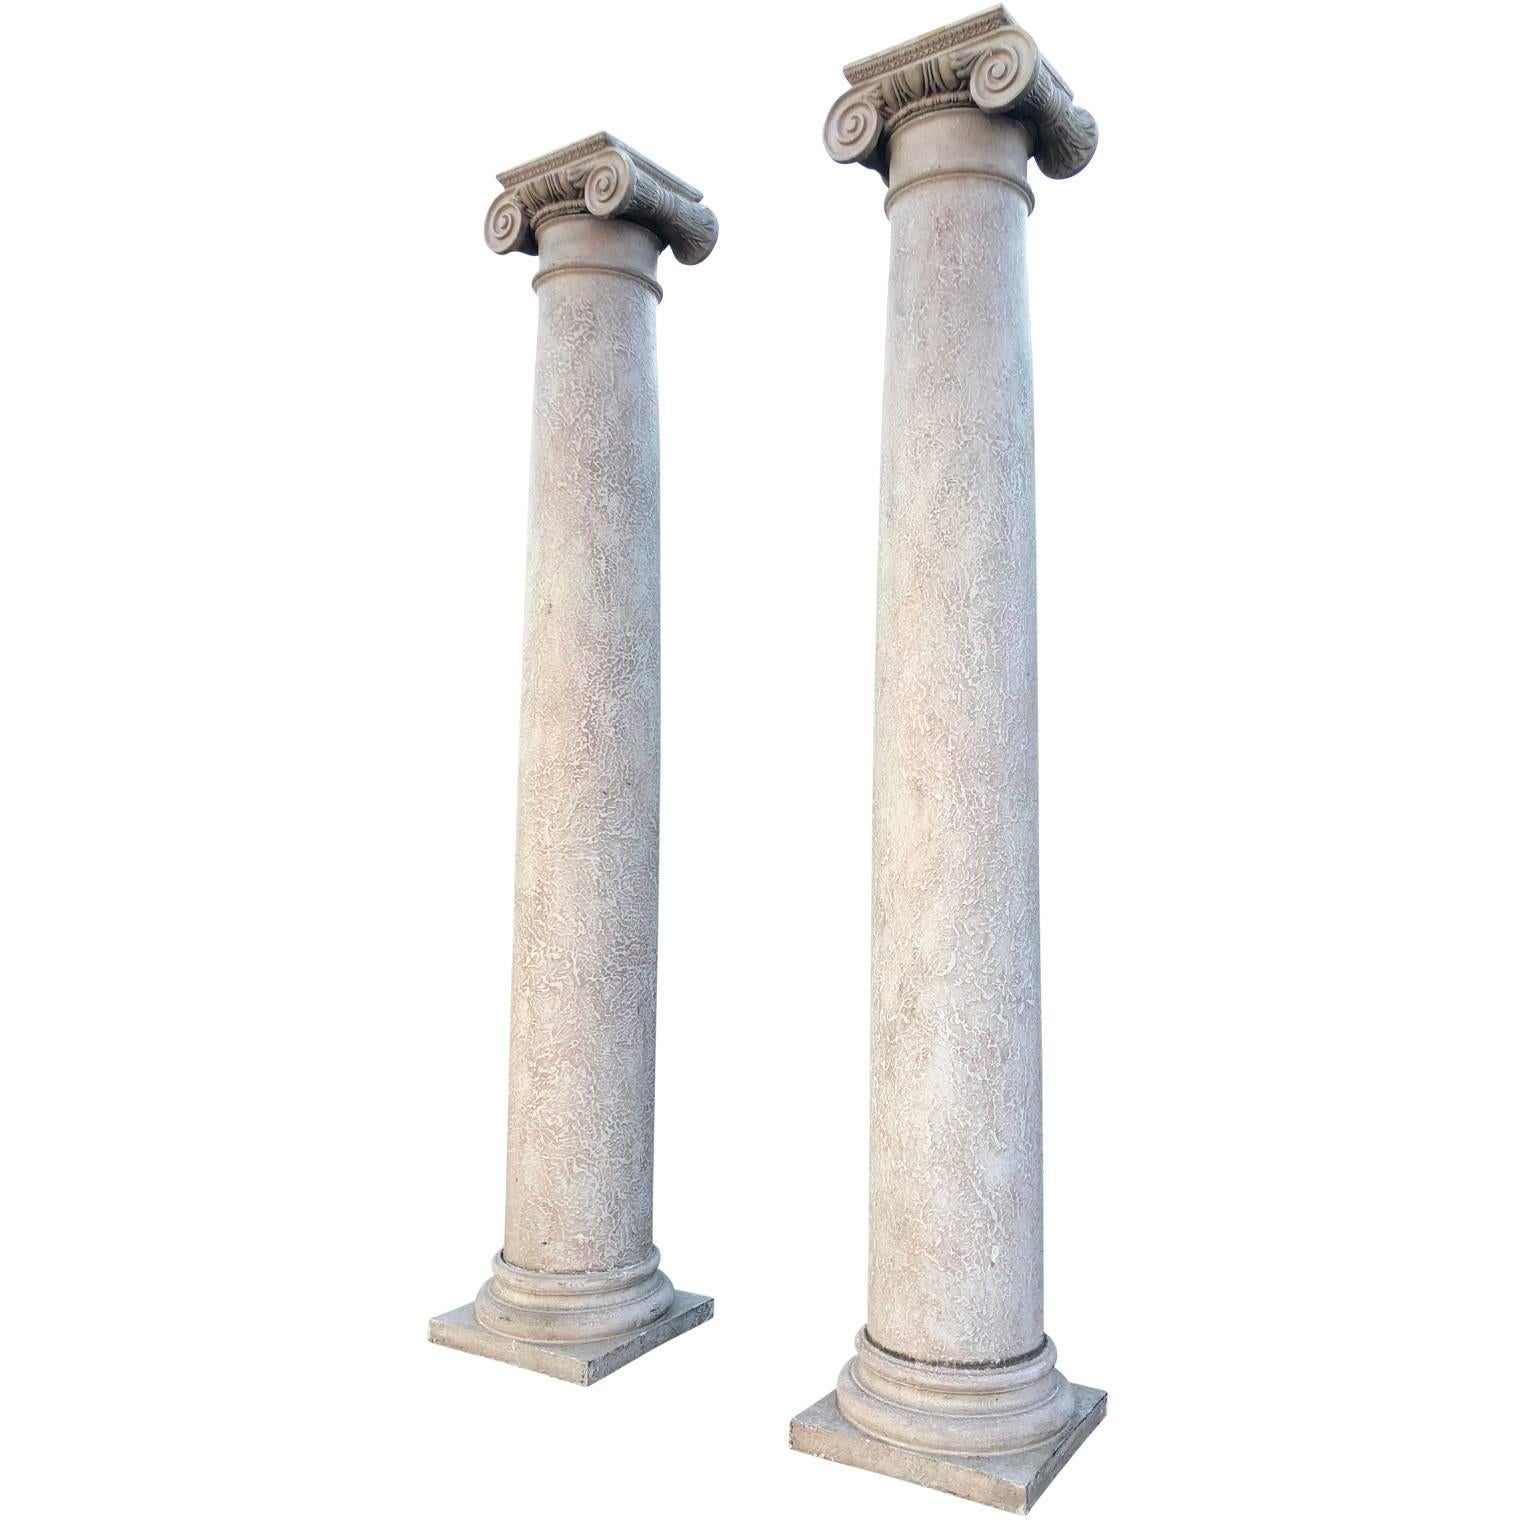 Pair of tall Architectural Ionic-Order columns.

They can be painted to fit into any interior

Each column comes in two part, top is separate from the column, see detailed image.